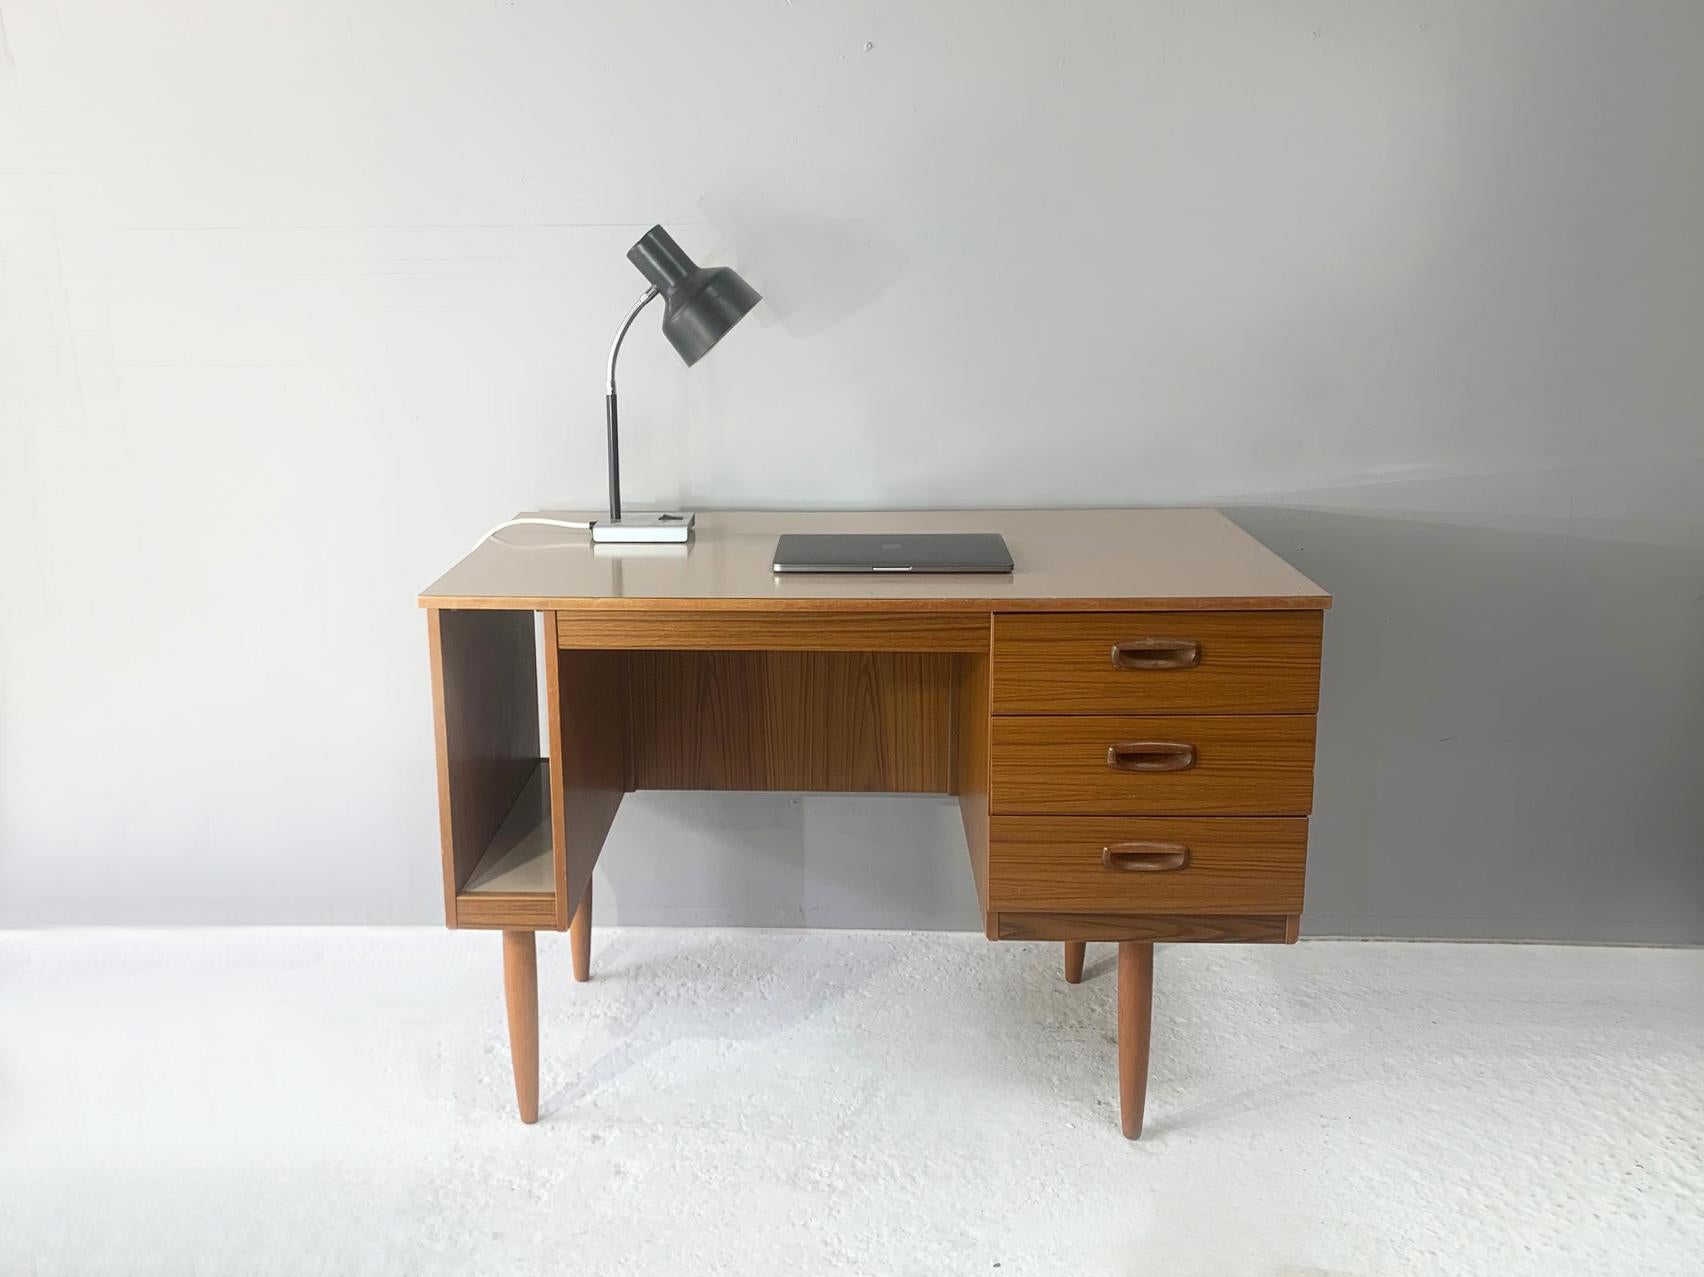 Founded in 1957 by Chaim Schreiber, Schreiber furniture is an interesting British success story. 

The Company was one of the biggest names in furniture in the 70s, rivalling G Plan, Avalon and other famous names.

In 1973 they added fitted